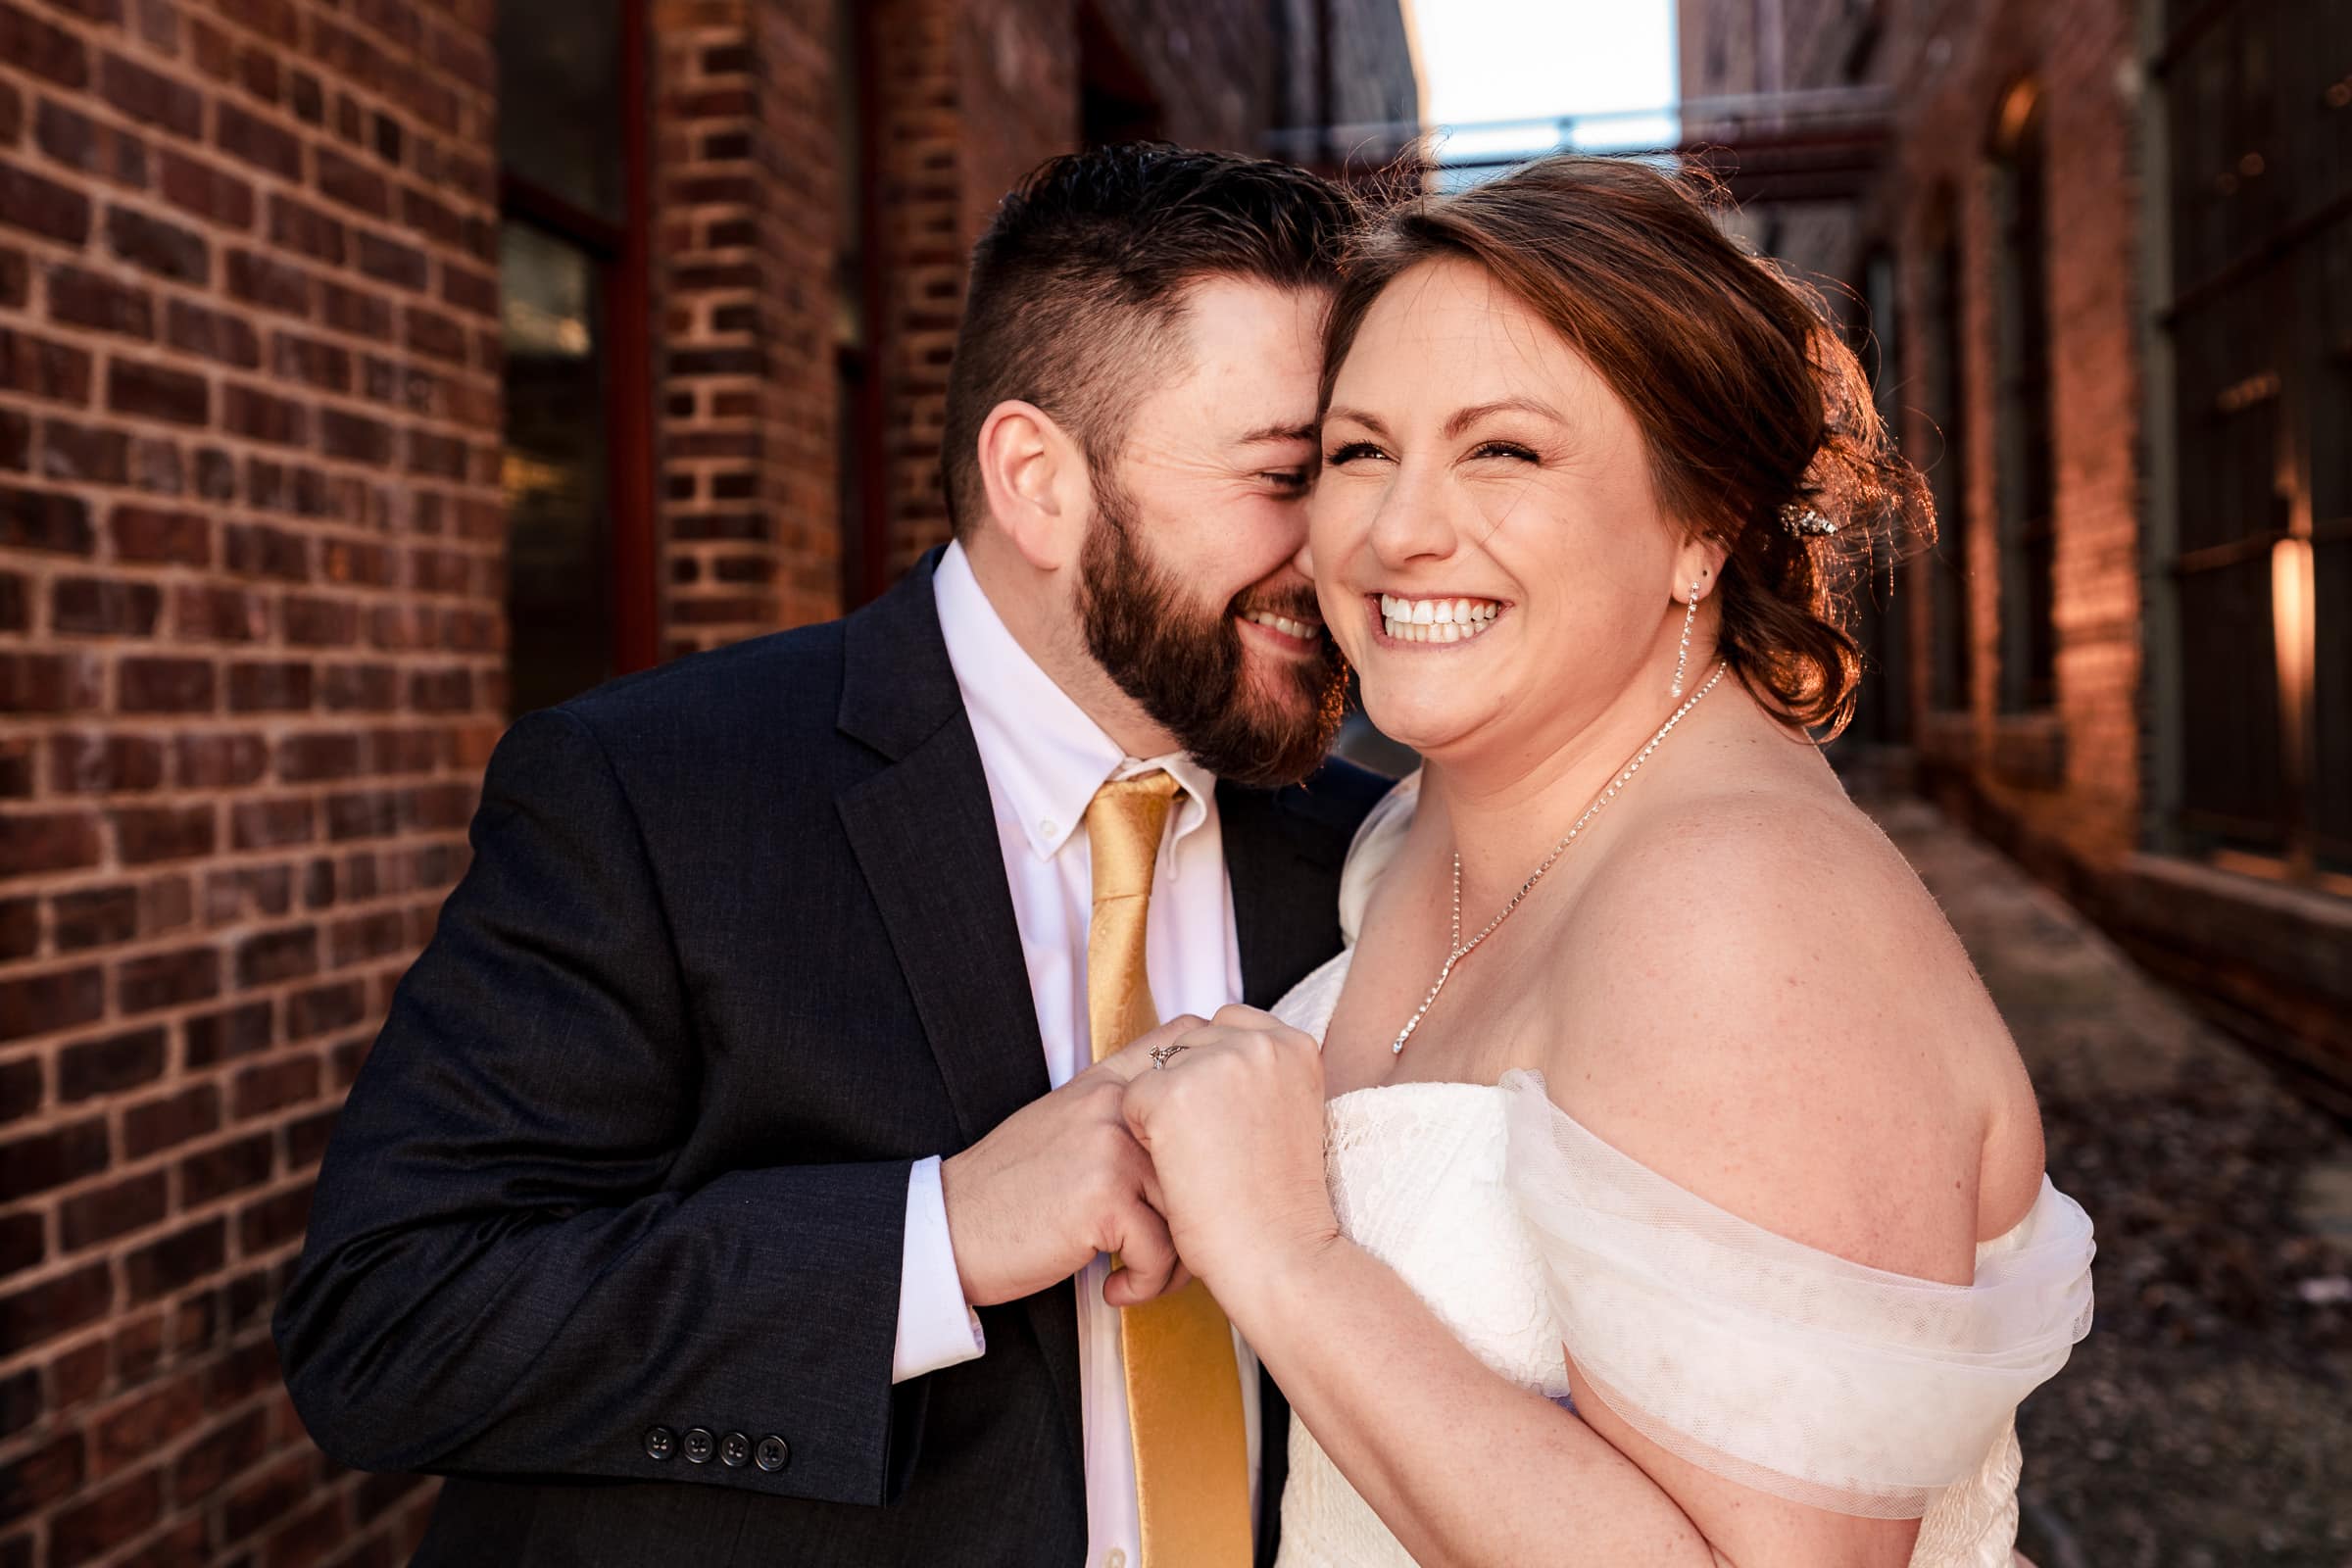 downtown raleigh elopement photos by Kivus & Camera